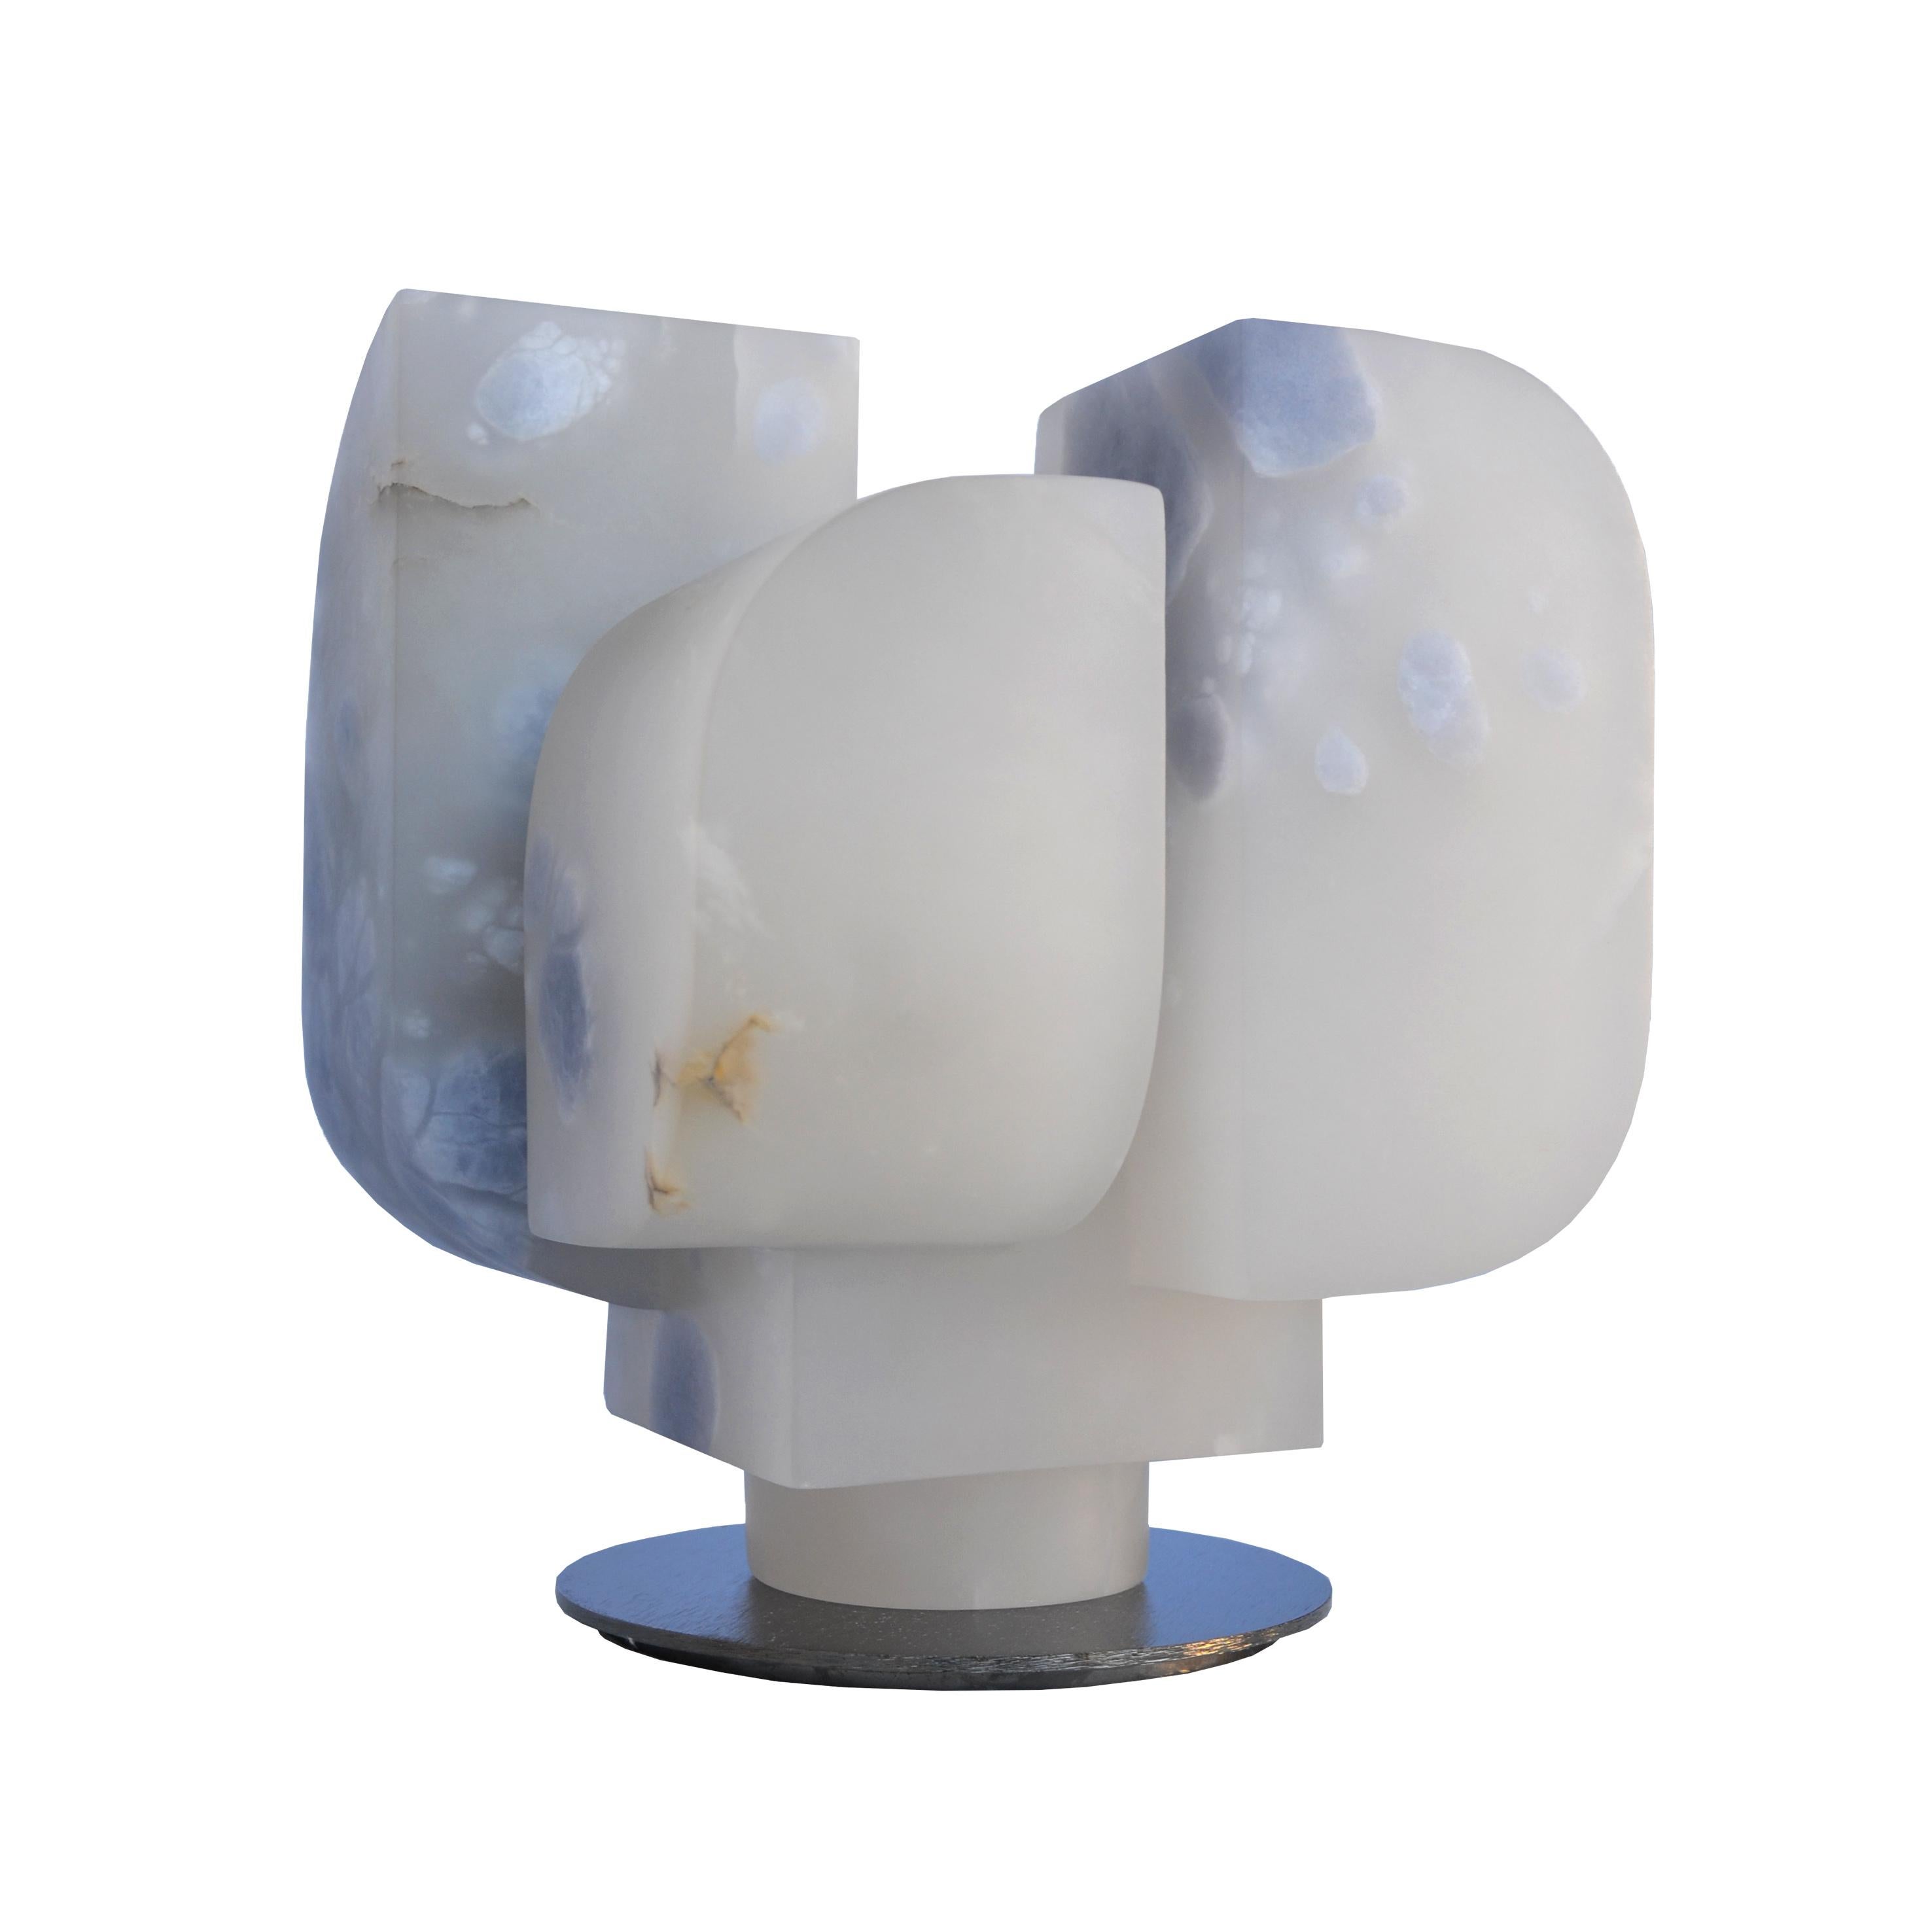 Lunaria Sculpture by Borja Barrajón
Dimensions: D 22 x W 22 x H 25 cm.
Materials: Blue alabaster.

Borja Barrajón Acedo (Madrid, 1985) began his training as a sculptor at the Faculty of Fine Arts in Madrid in 2006. His passion for stone as an